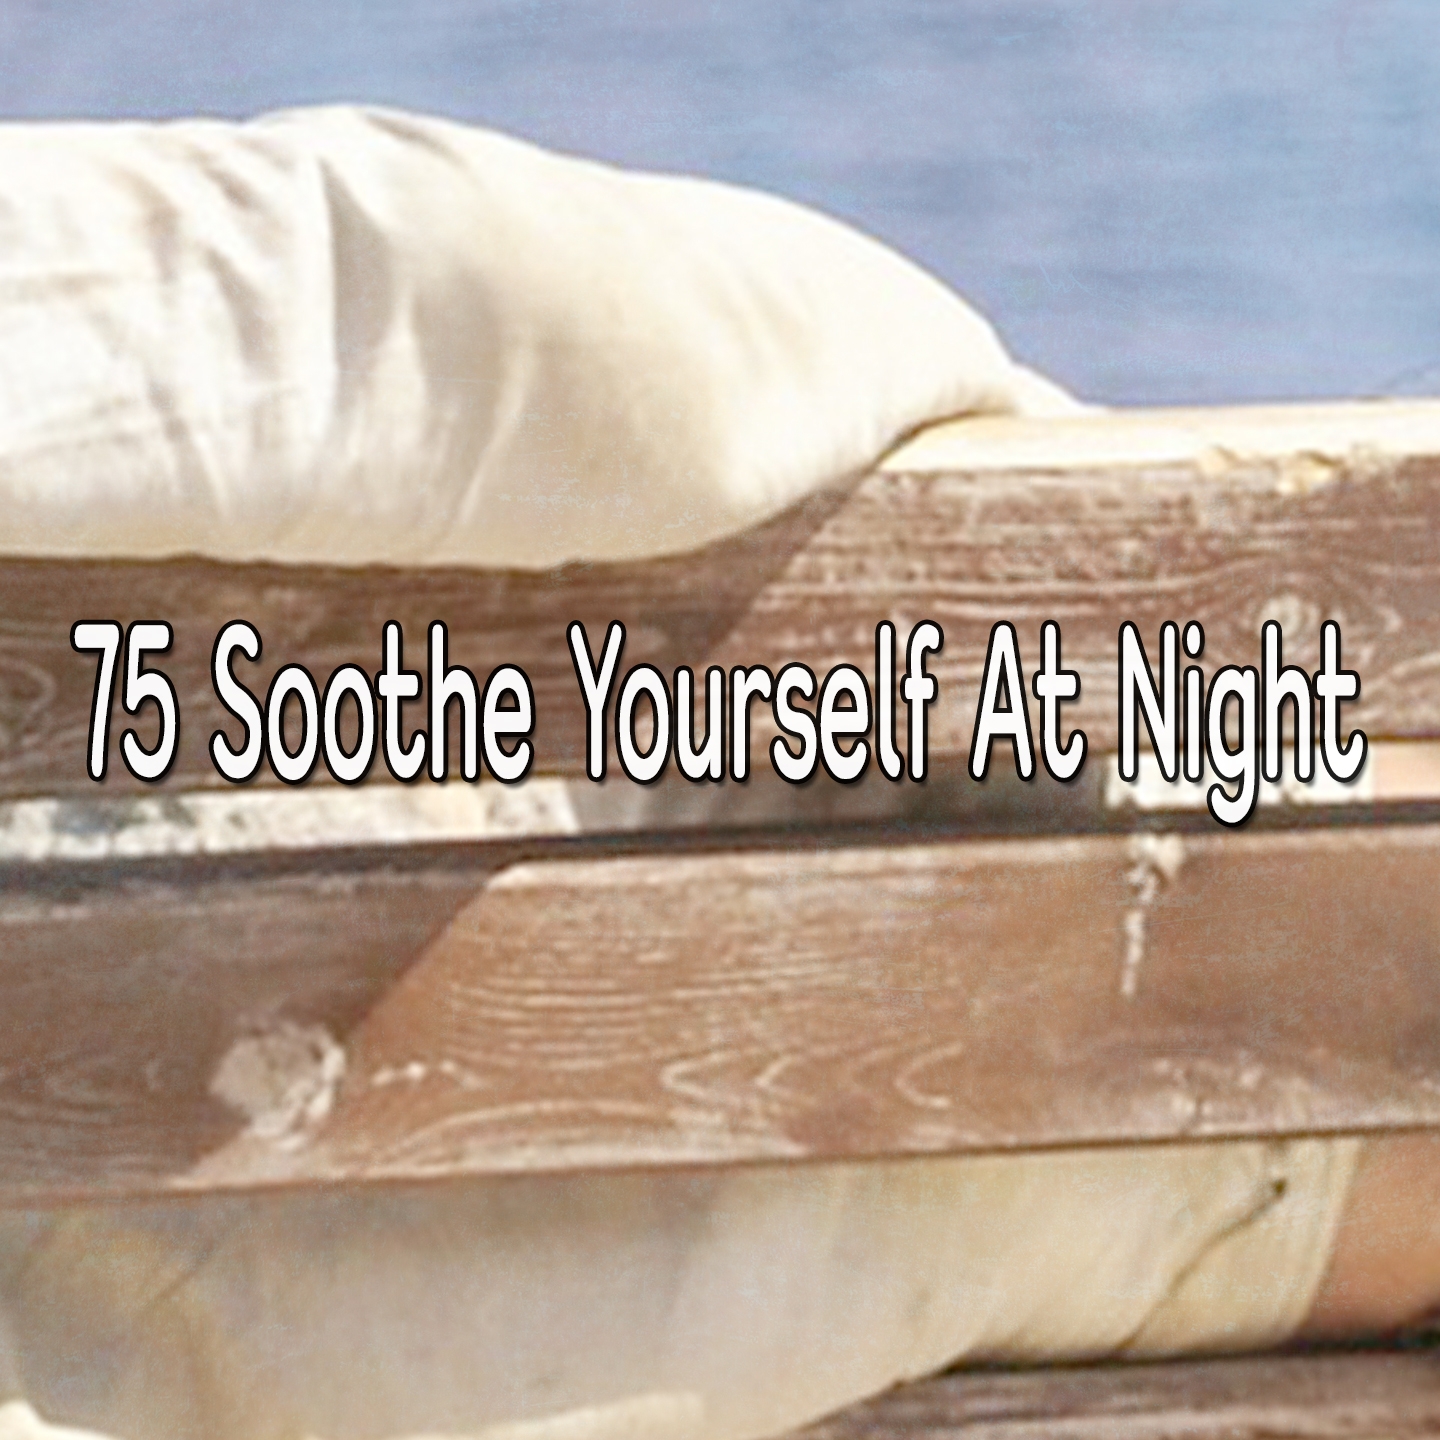 75 Soothe Yourself At Night